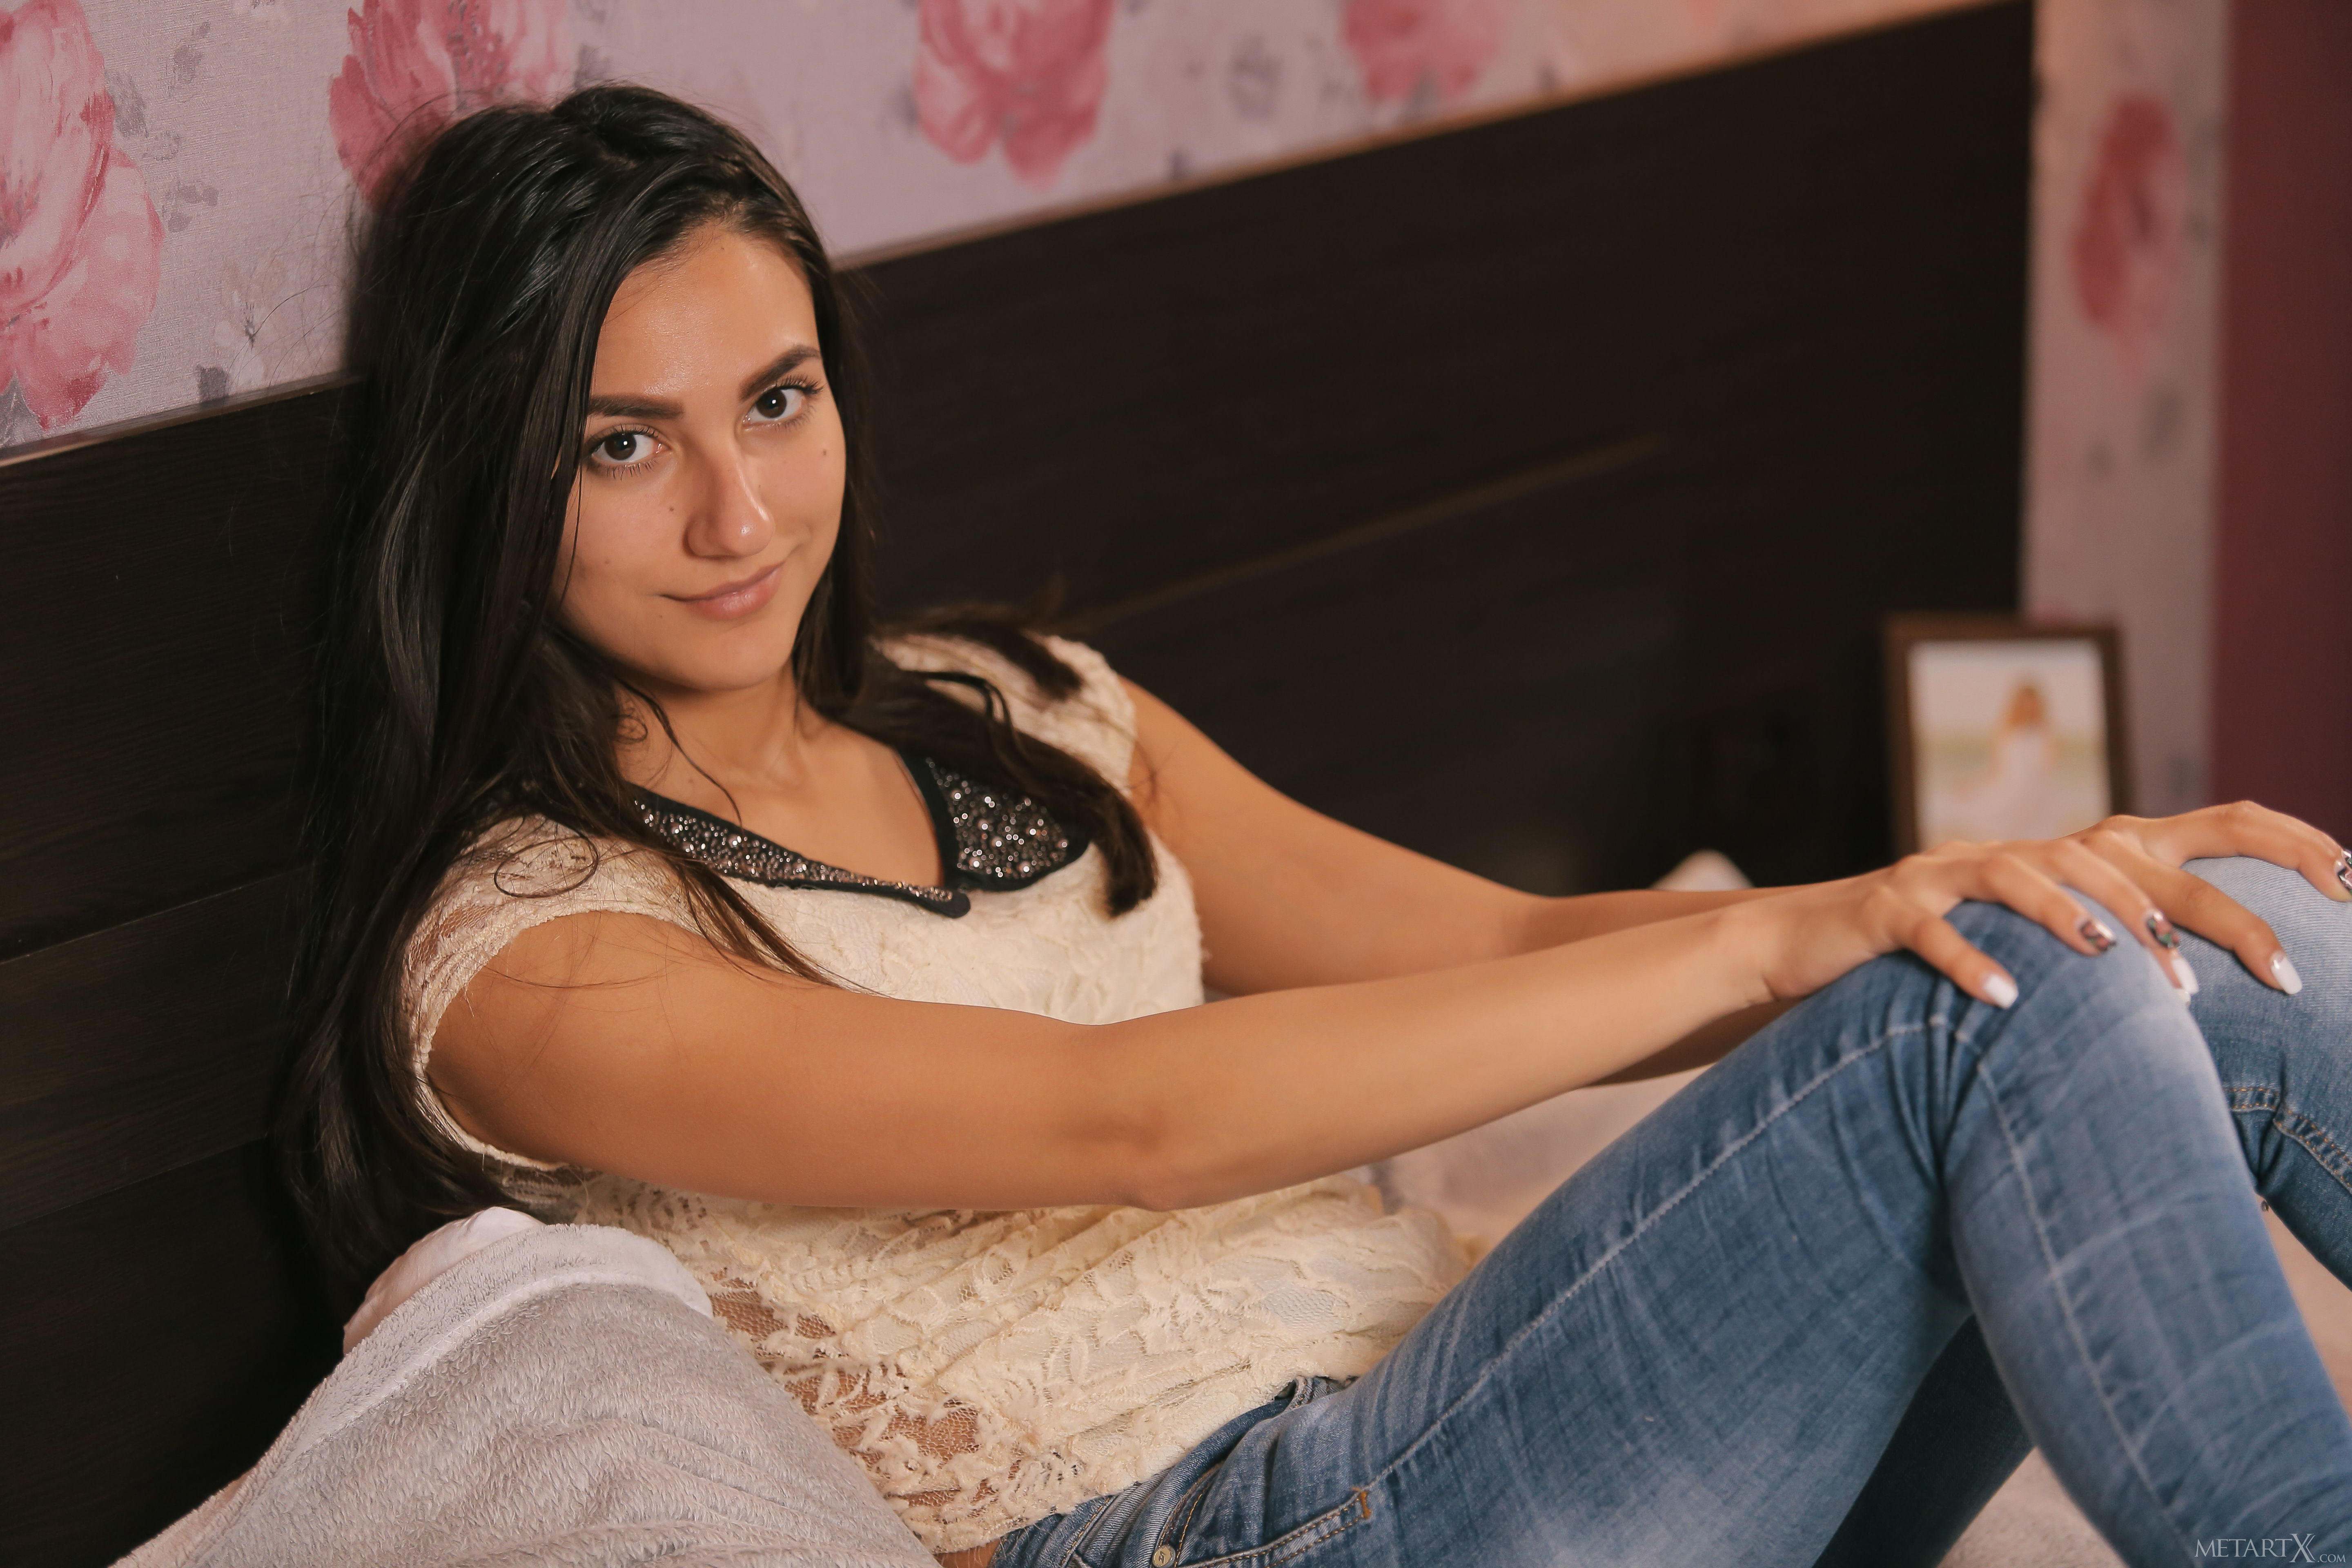 Russian Women Russian Model Jeans In Bed Brunette Painted Nails Long Hair Women Indoors Looking At V 5760x3840